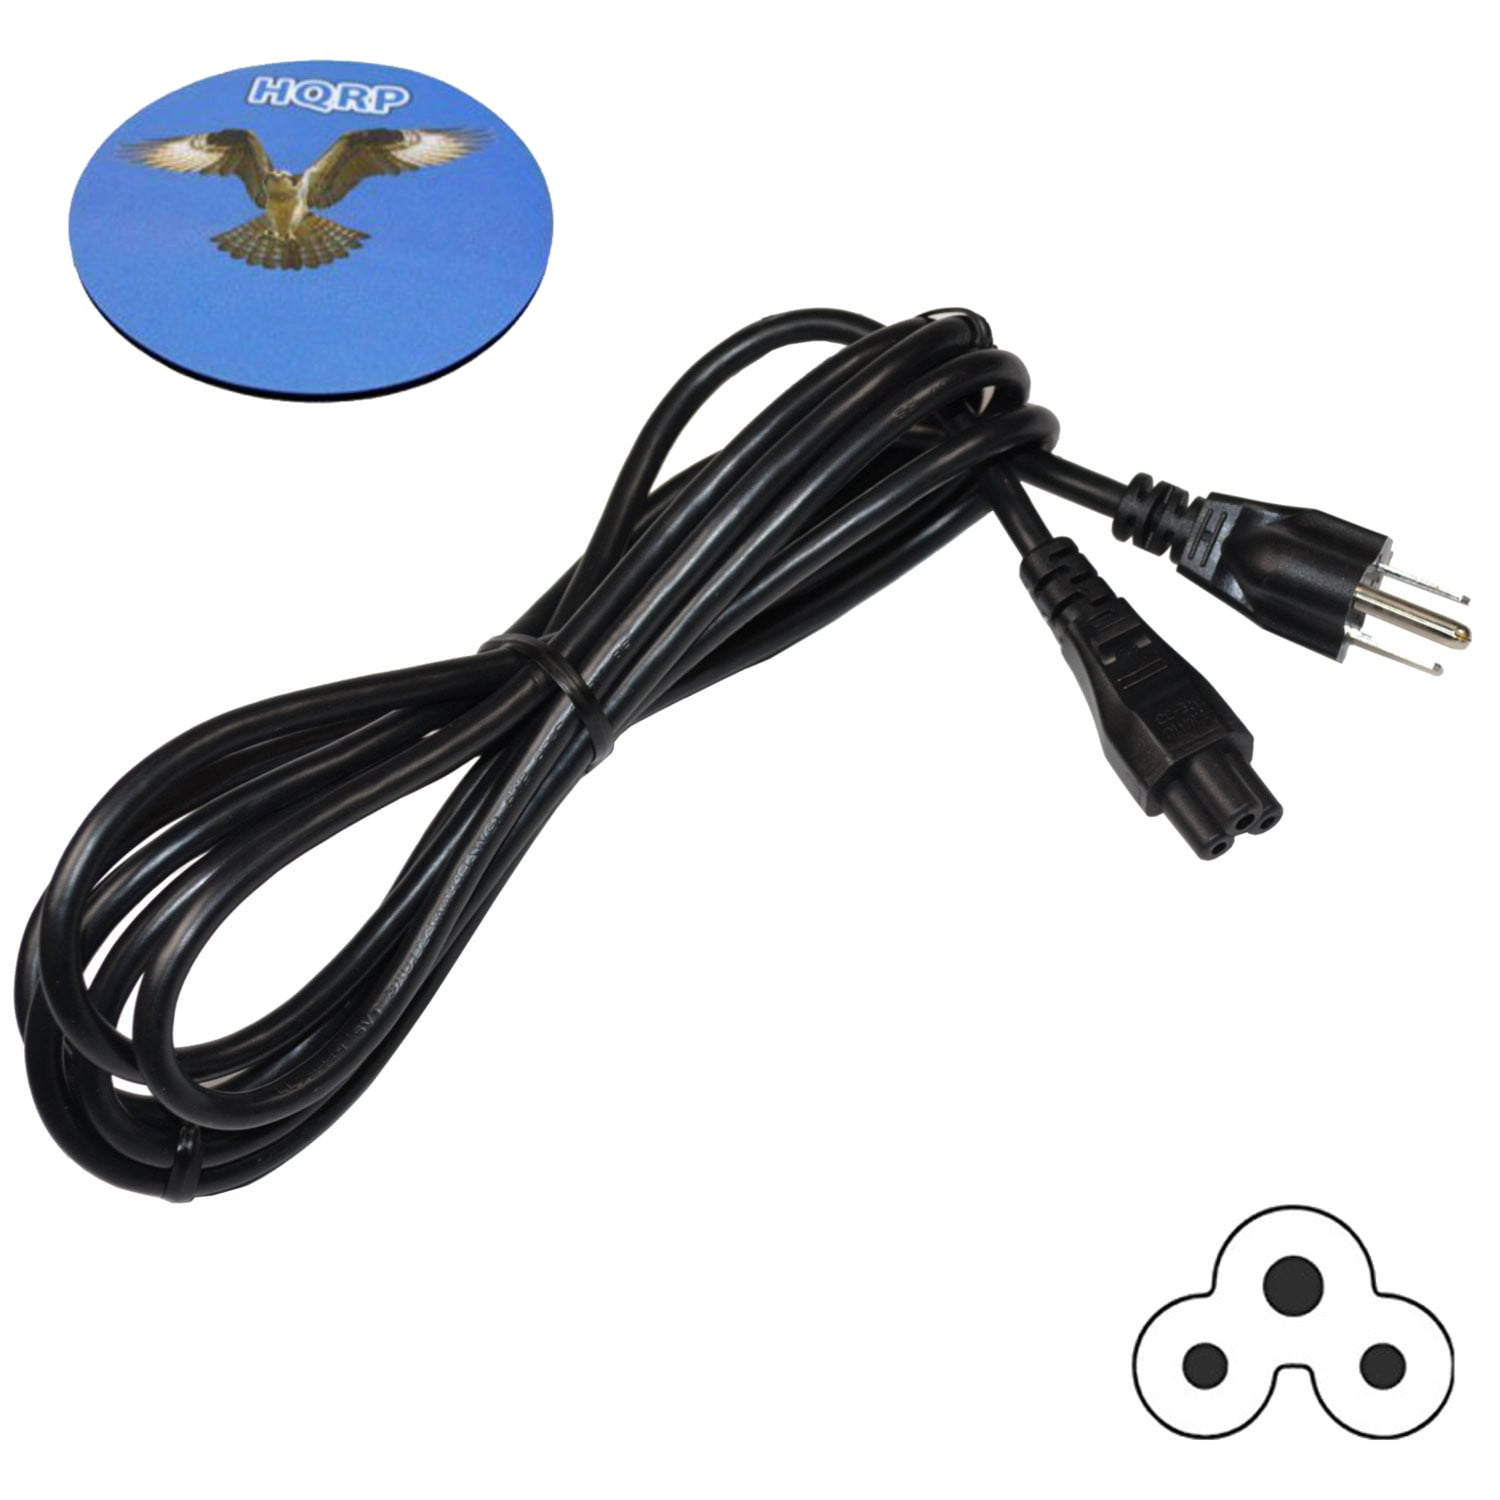 HQRP AC Power Cord for Viore 30452150015 LC32VH70 LC42VF56 LCD19VH56 LCD22VH56 